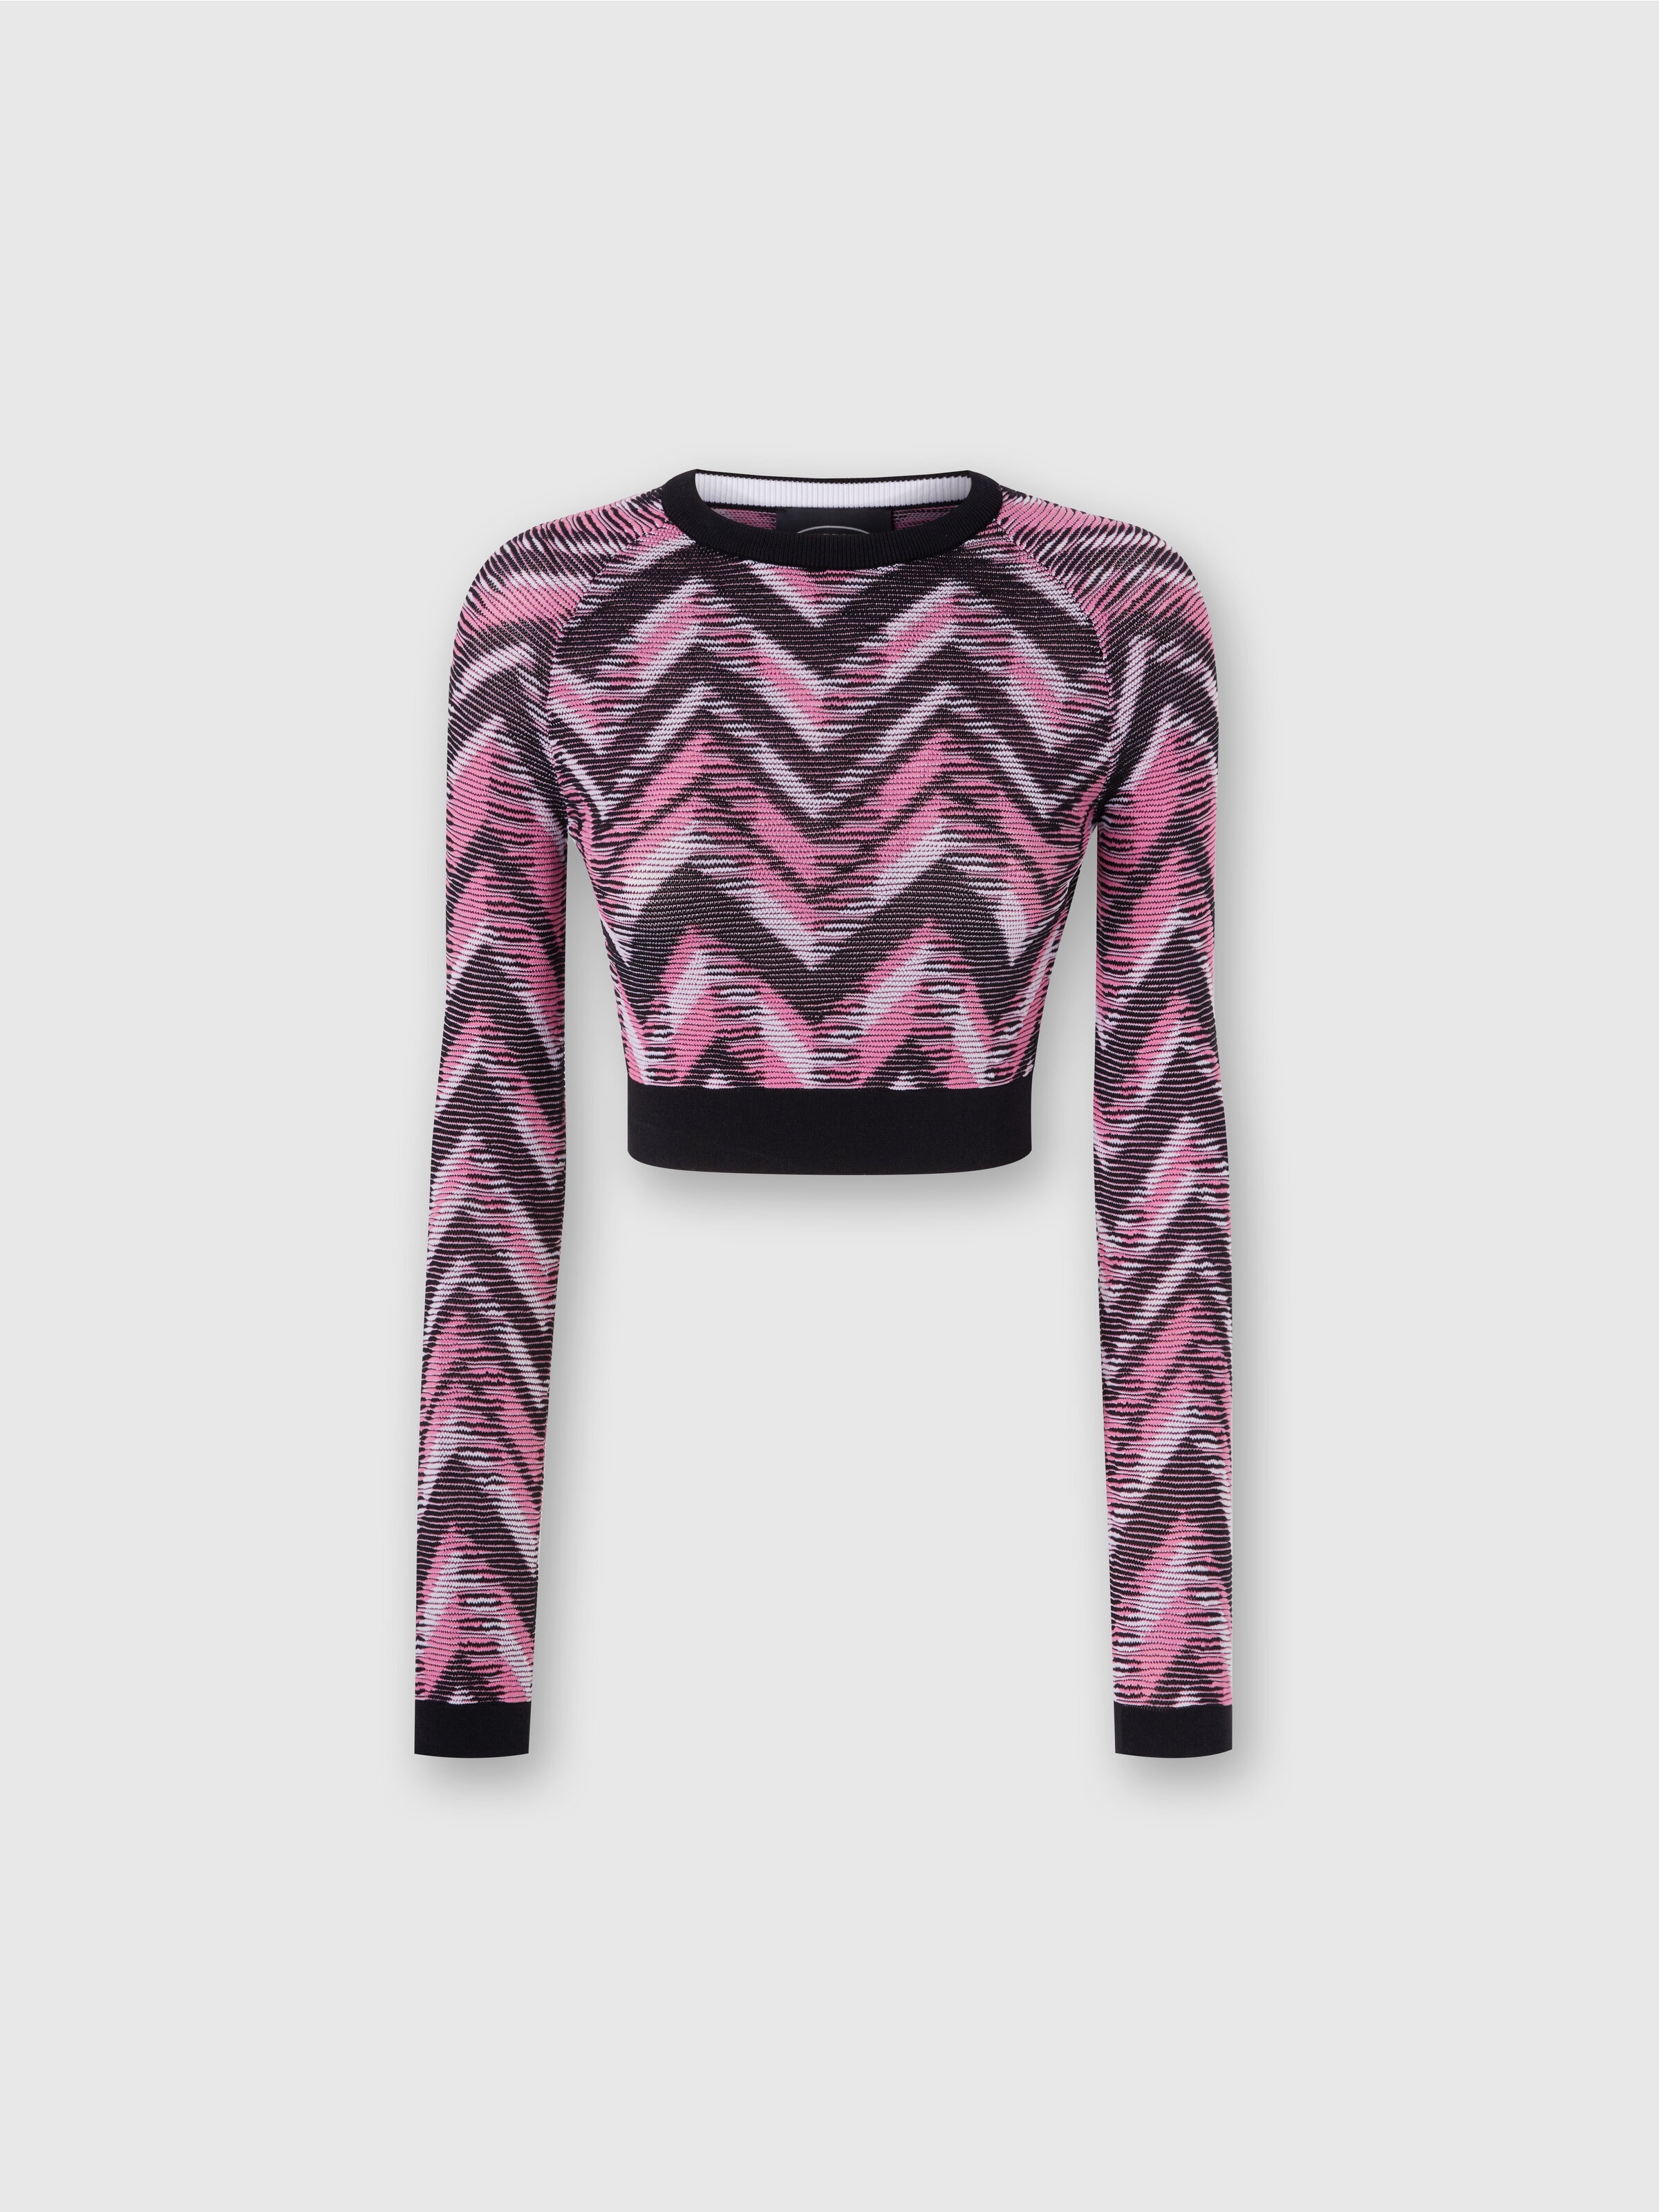 Long-sleeved crop top in chevron knit with logo, Multicoloured  - 0